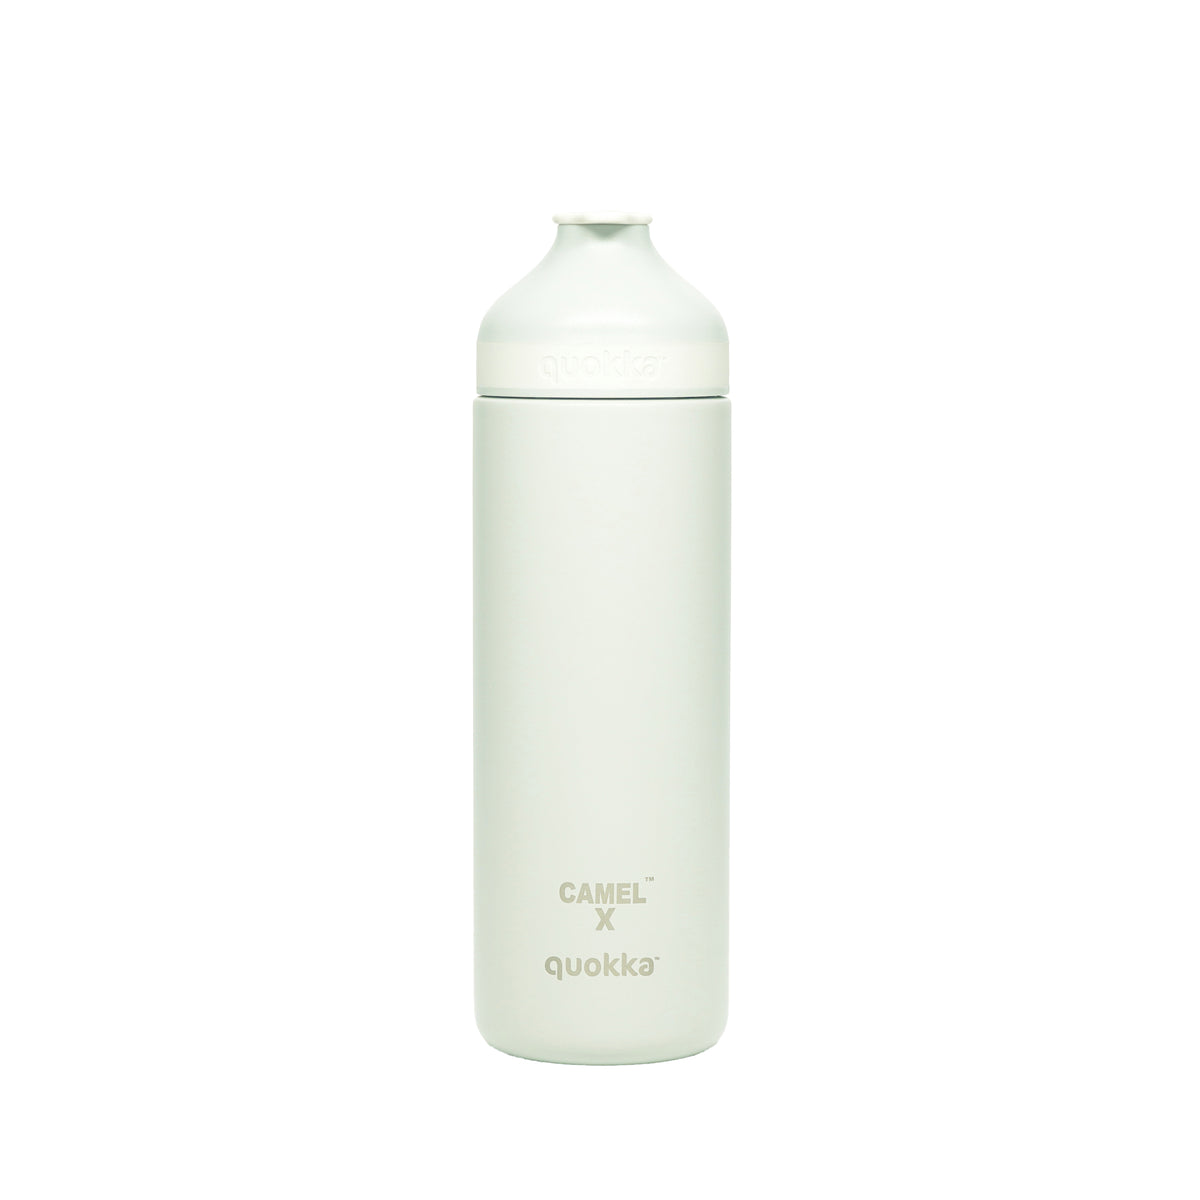 MAGSNAP Vacuum Bottle (Magnetic Feature) White Powder Finish